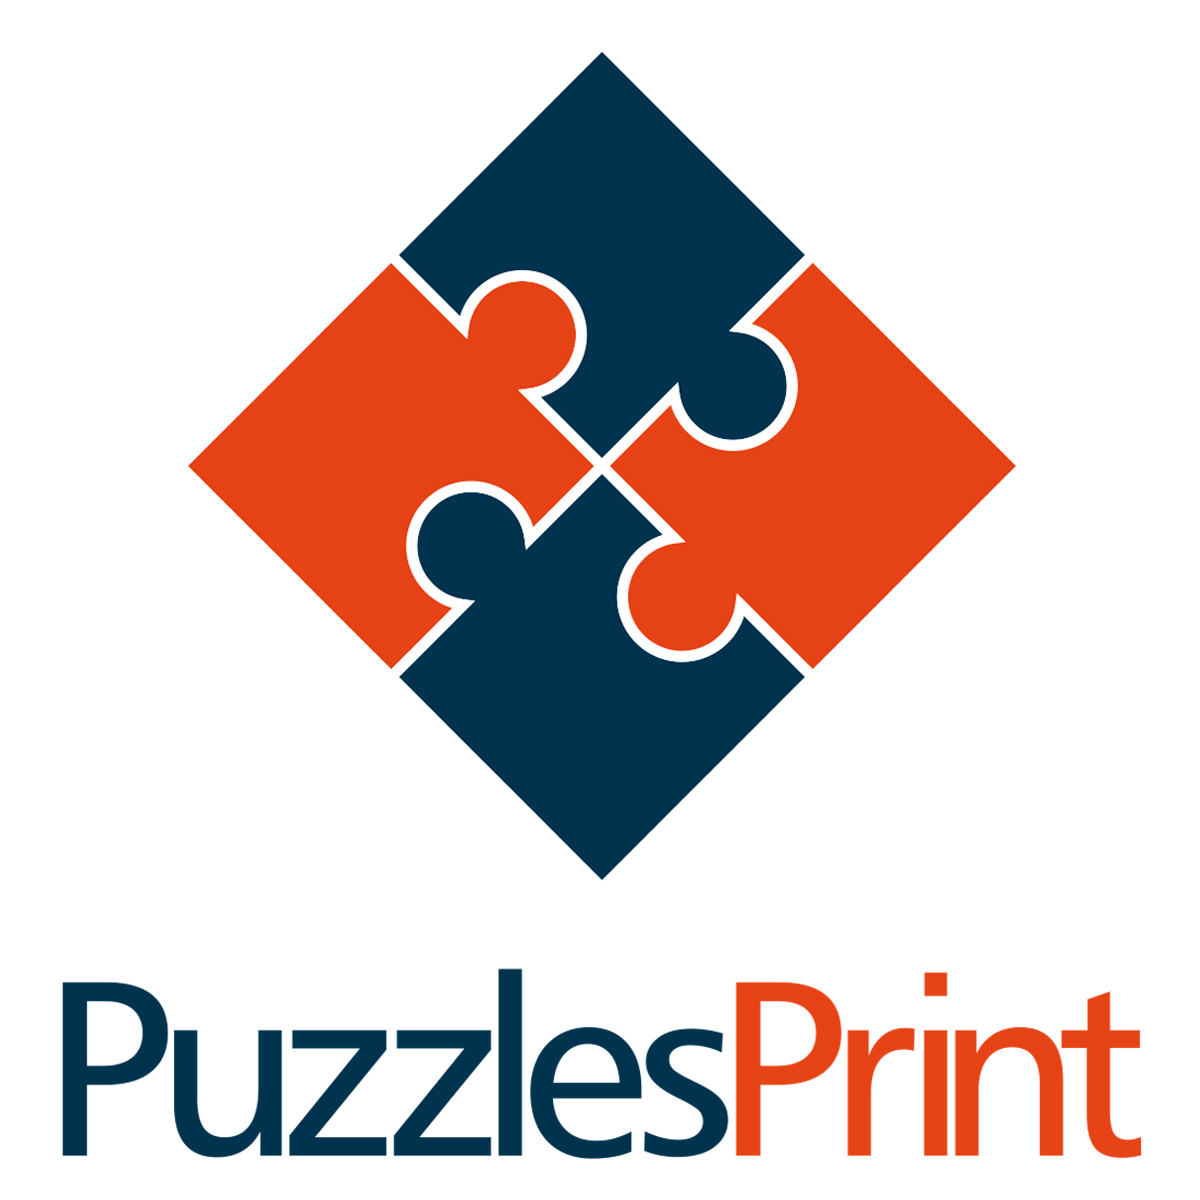 Make Picture Puzzle With 1000 Pieces - Print Puzzle Nz